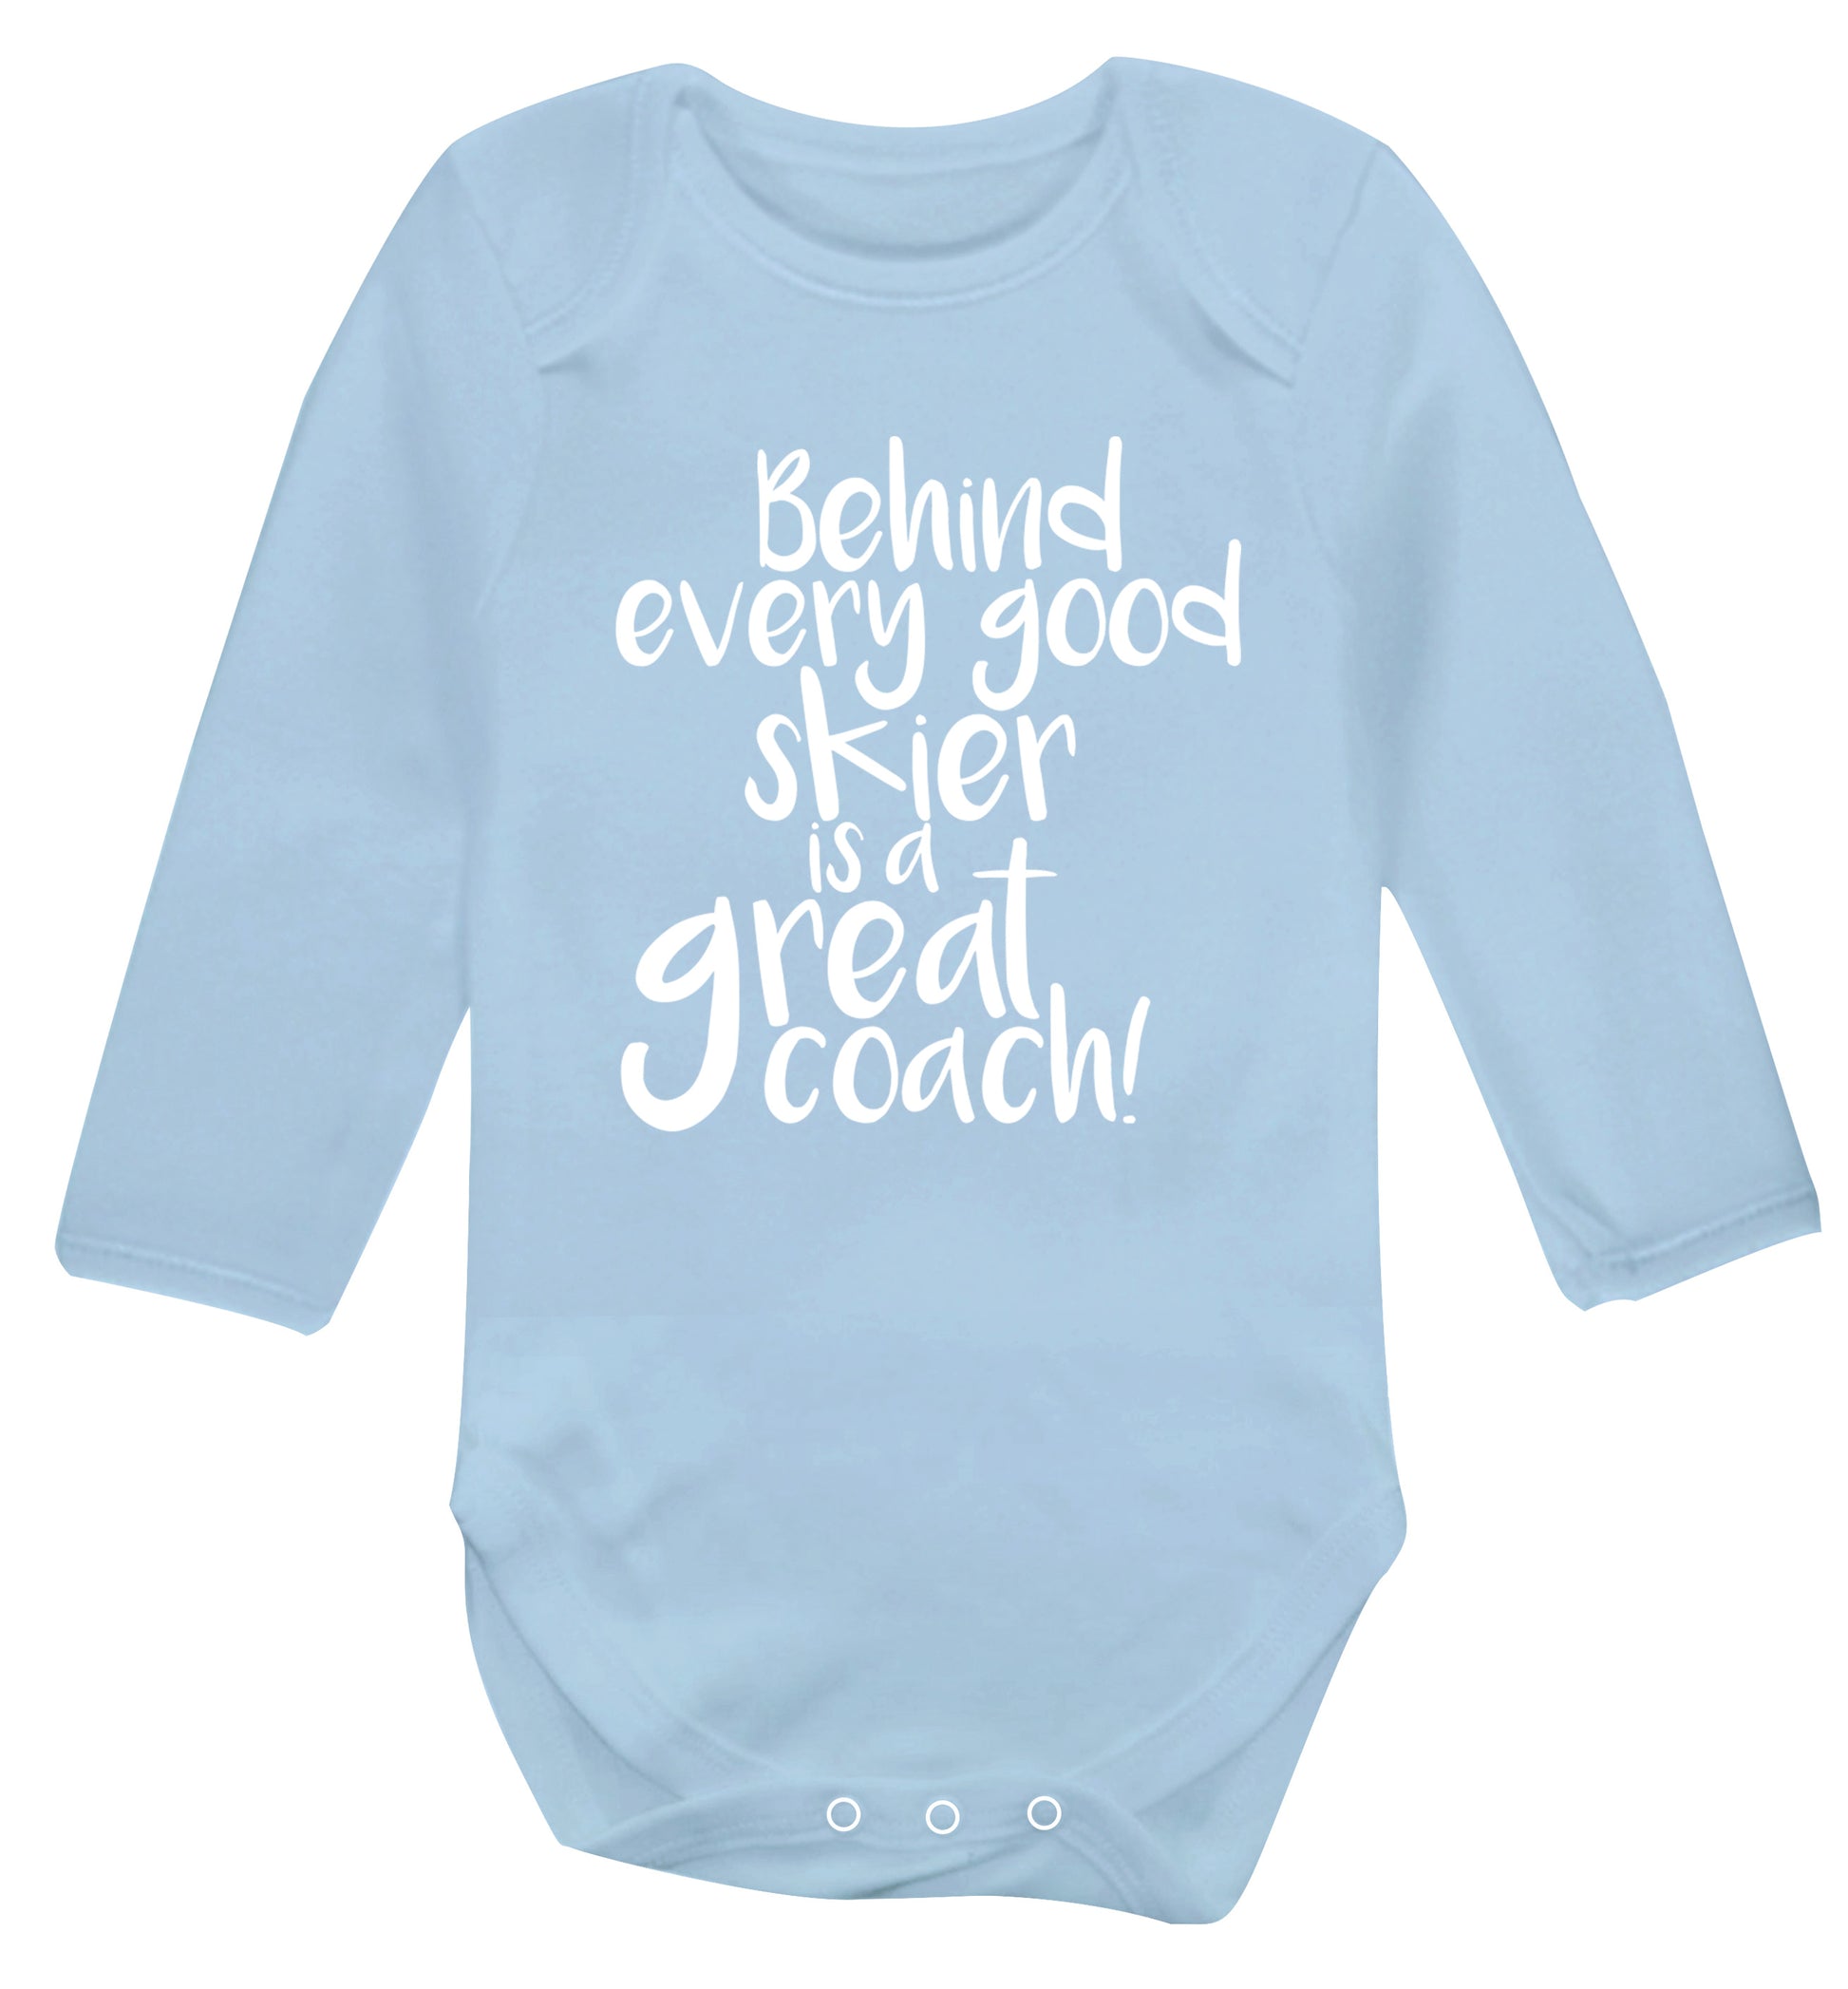 Behind every good skier is a great coach! Baby Vest long sleeved pale blue 6-12 months